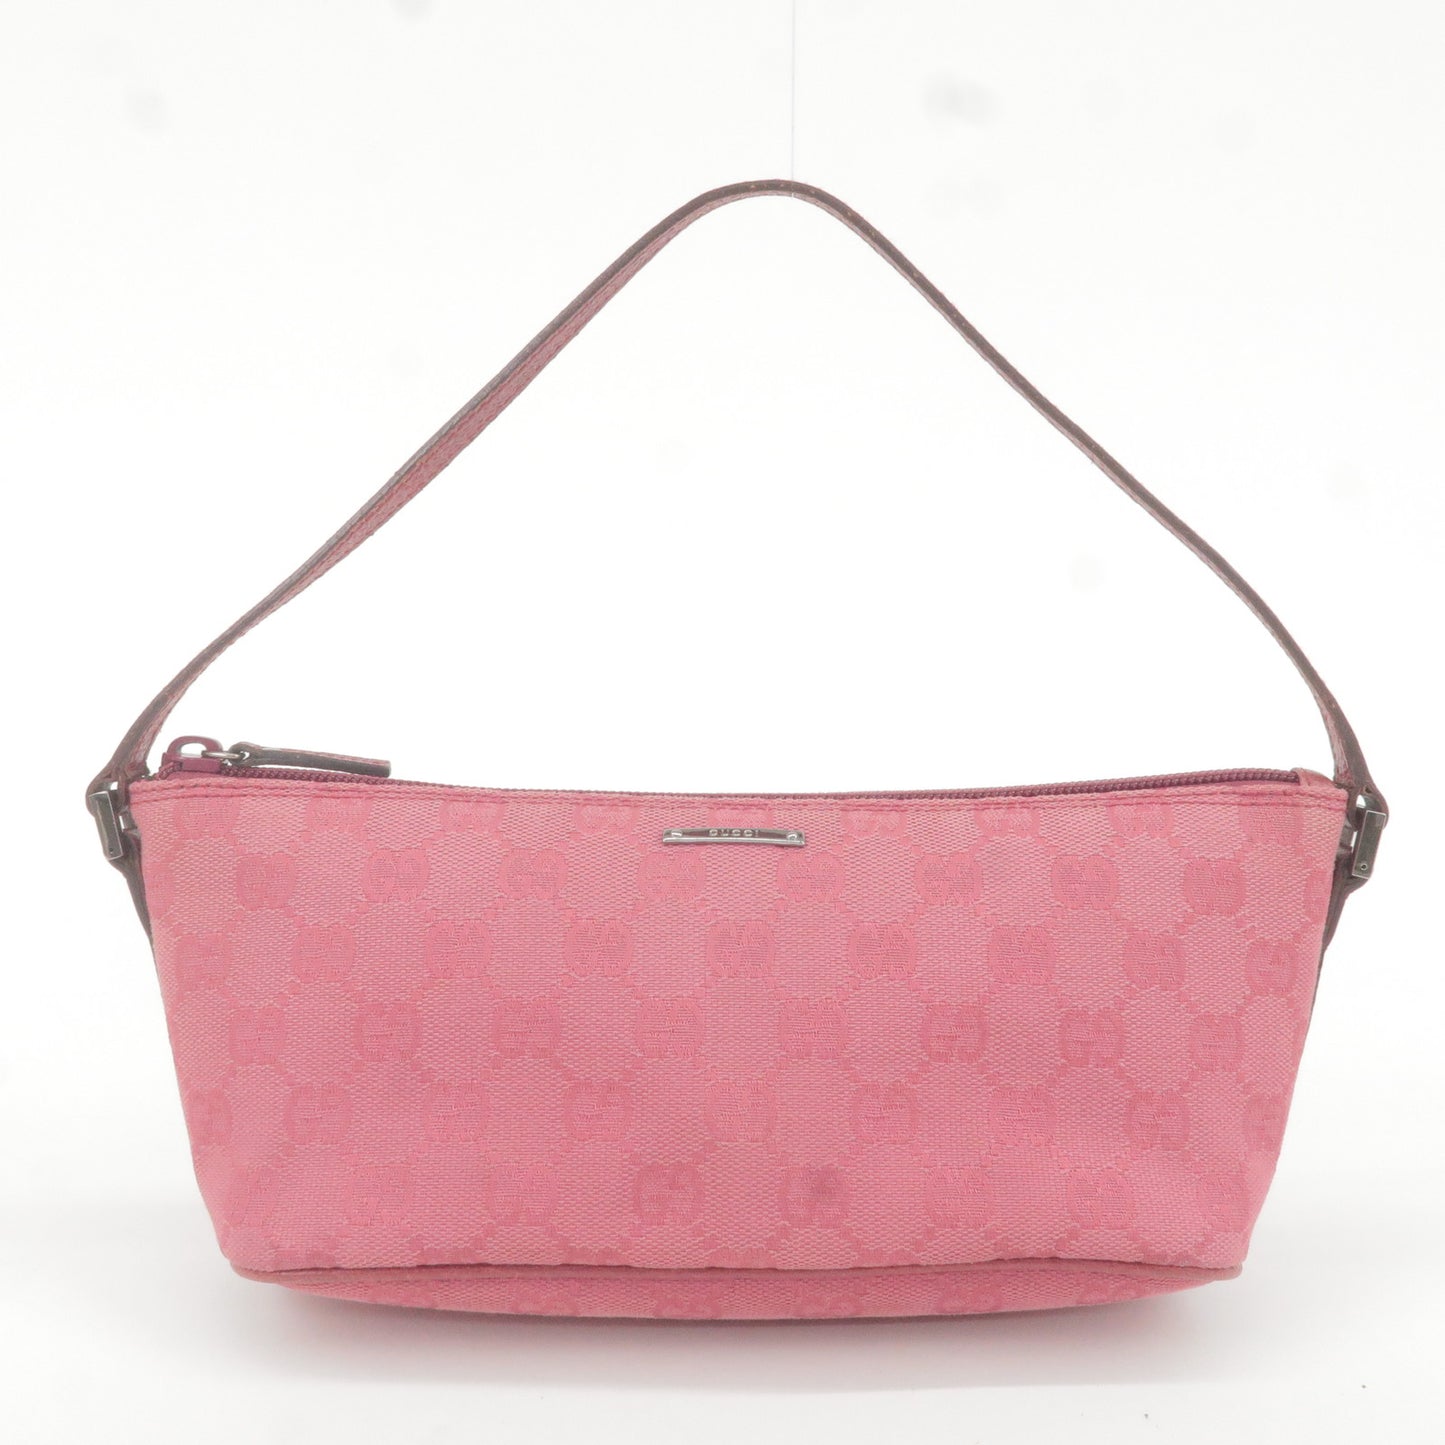 GUCCI GG Canvas Leather Boat Bag Hand Bag Purse Pink 07198